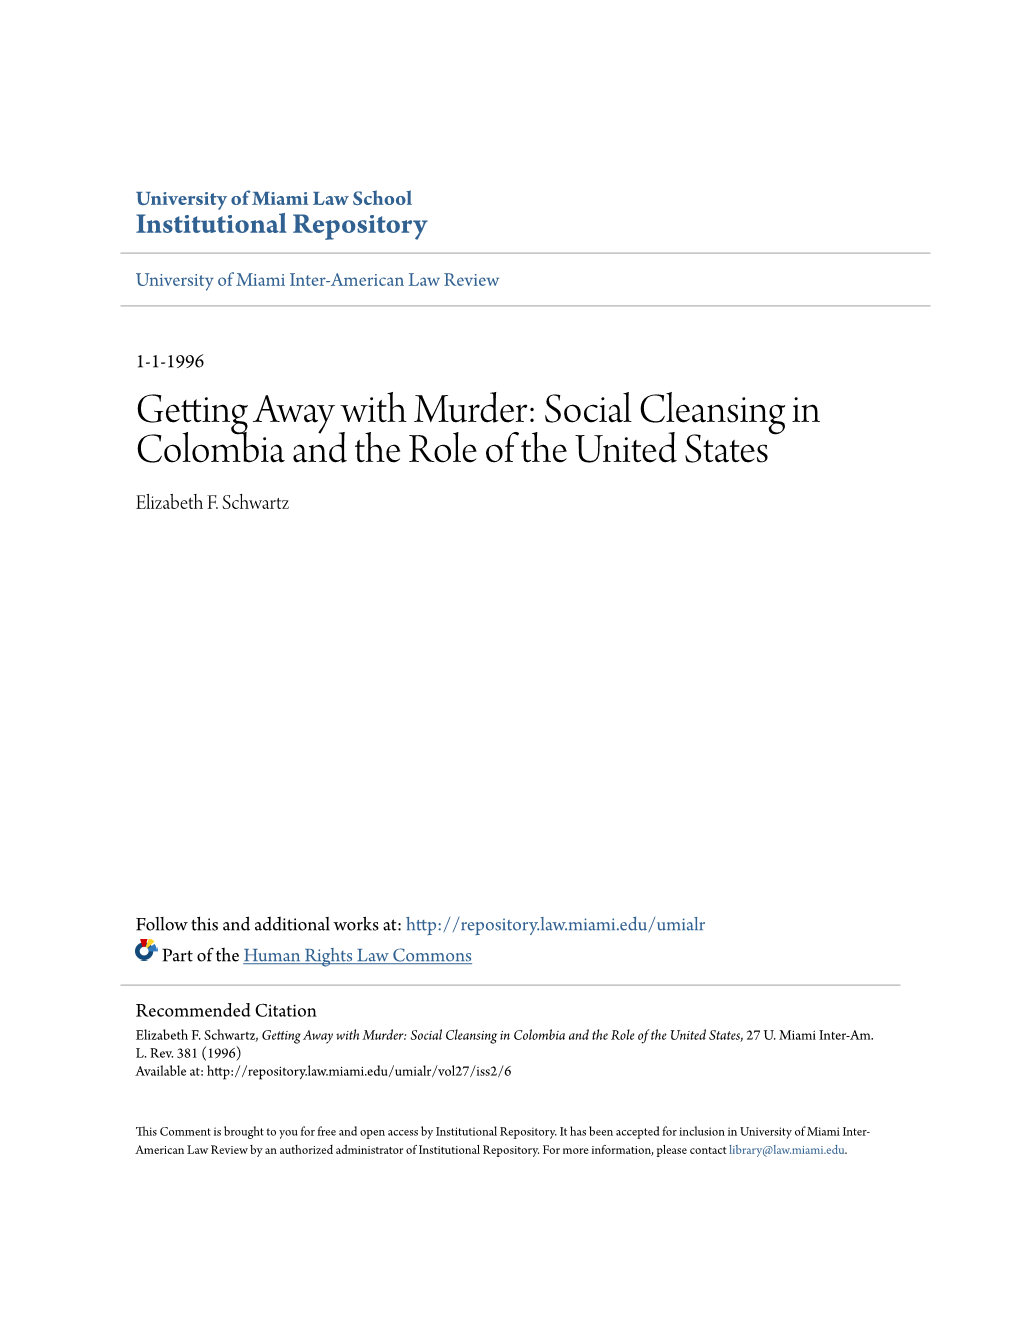 Social Cleansing in Colombia and the Role of the United States Elizabeth F